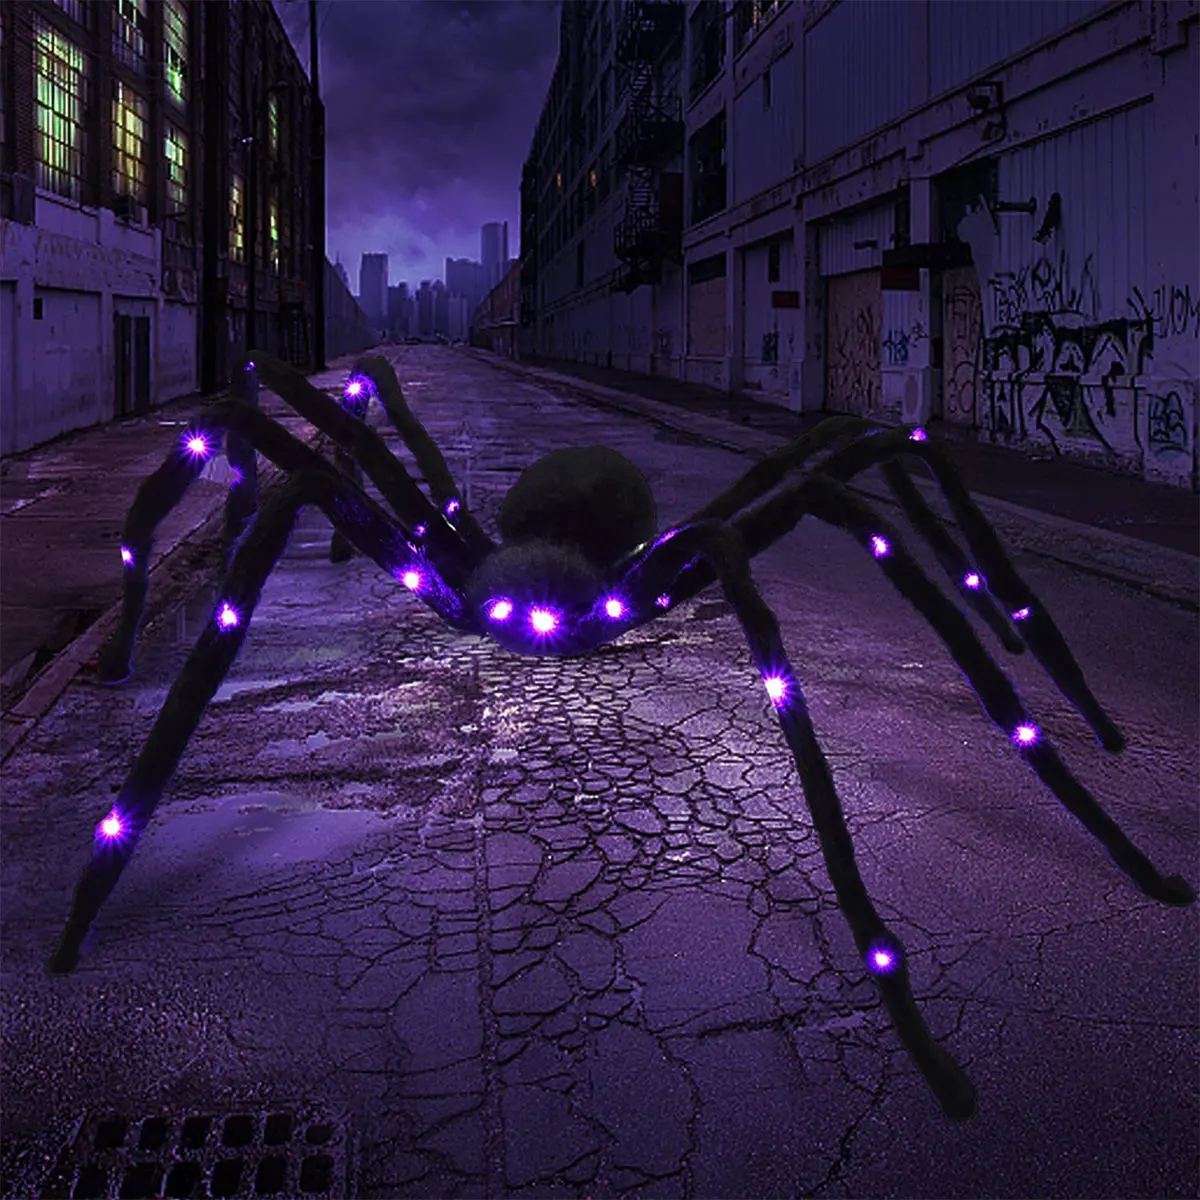 

L 4Ft Giant Spiders Halloween Realistic Black Hairy Spiders with Purple LED Lights Halloween Light Up Spider Scary Fake Spiders